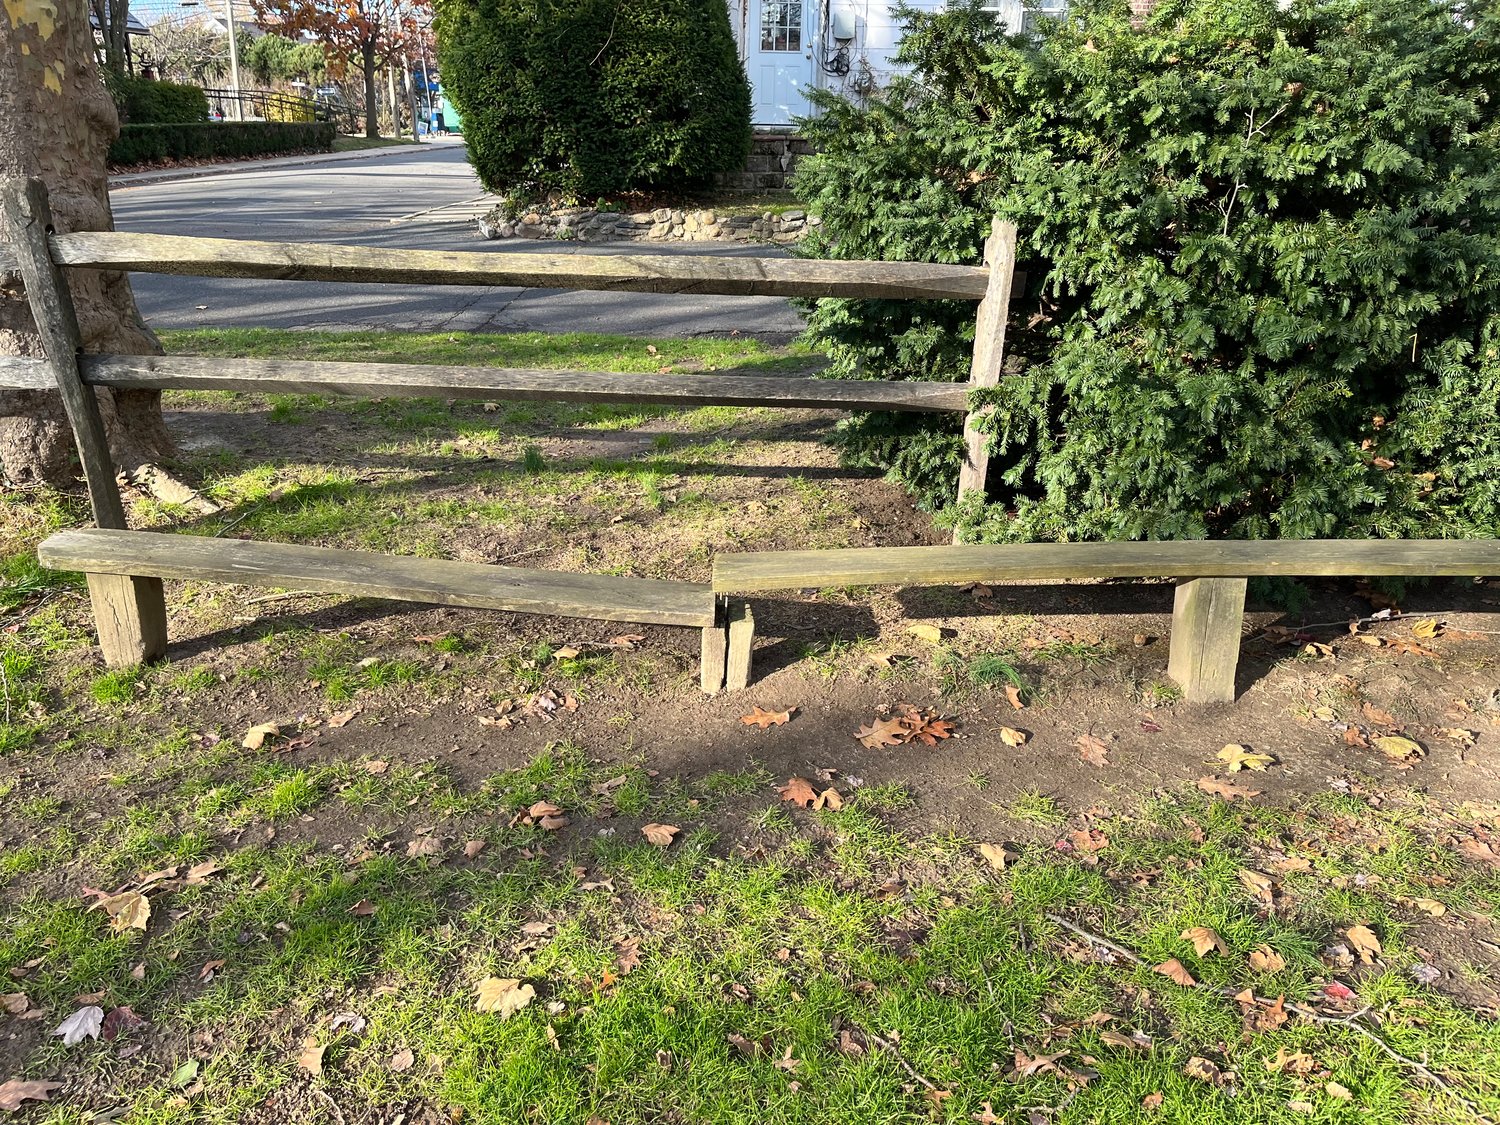 Without a deed, the village can’t repair Roslyn Park’s benches, which are inadequate for public use.